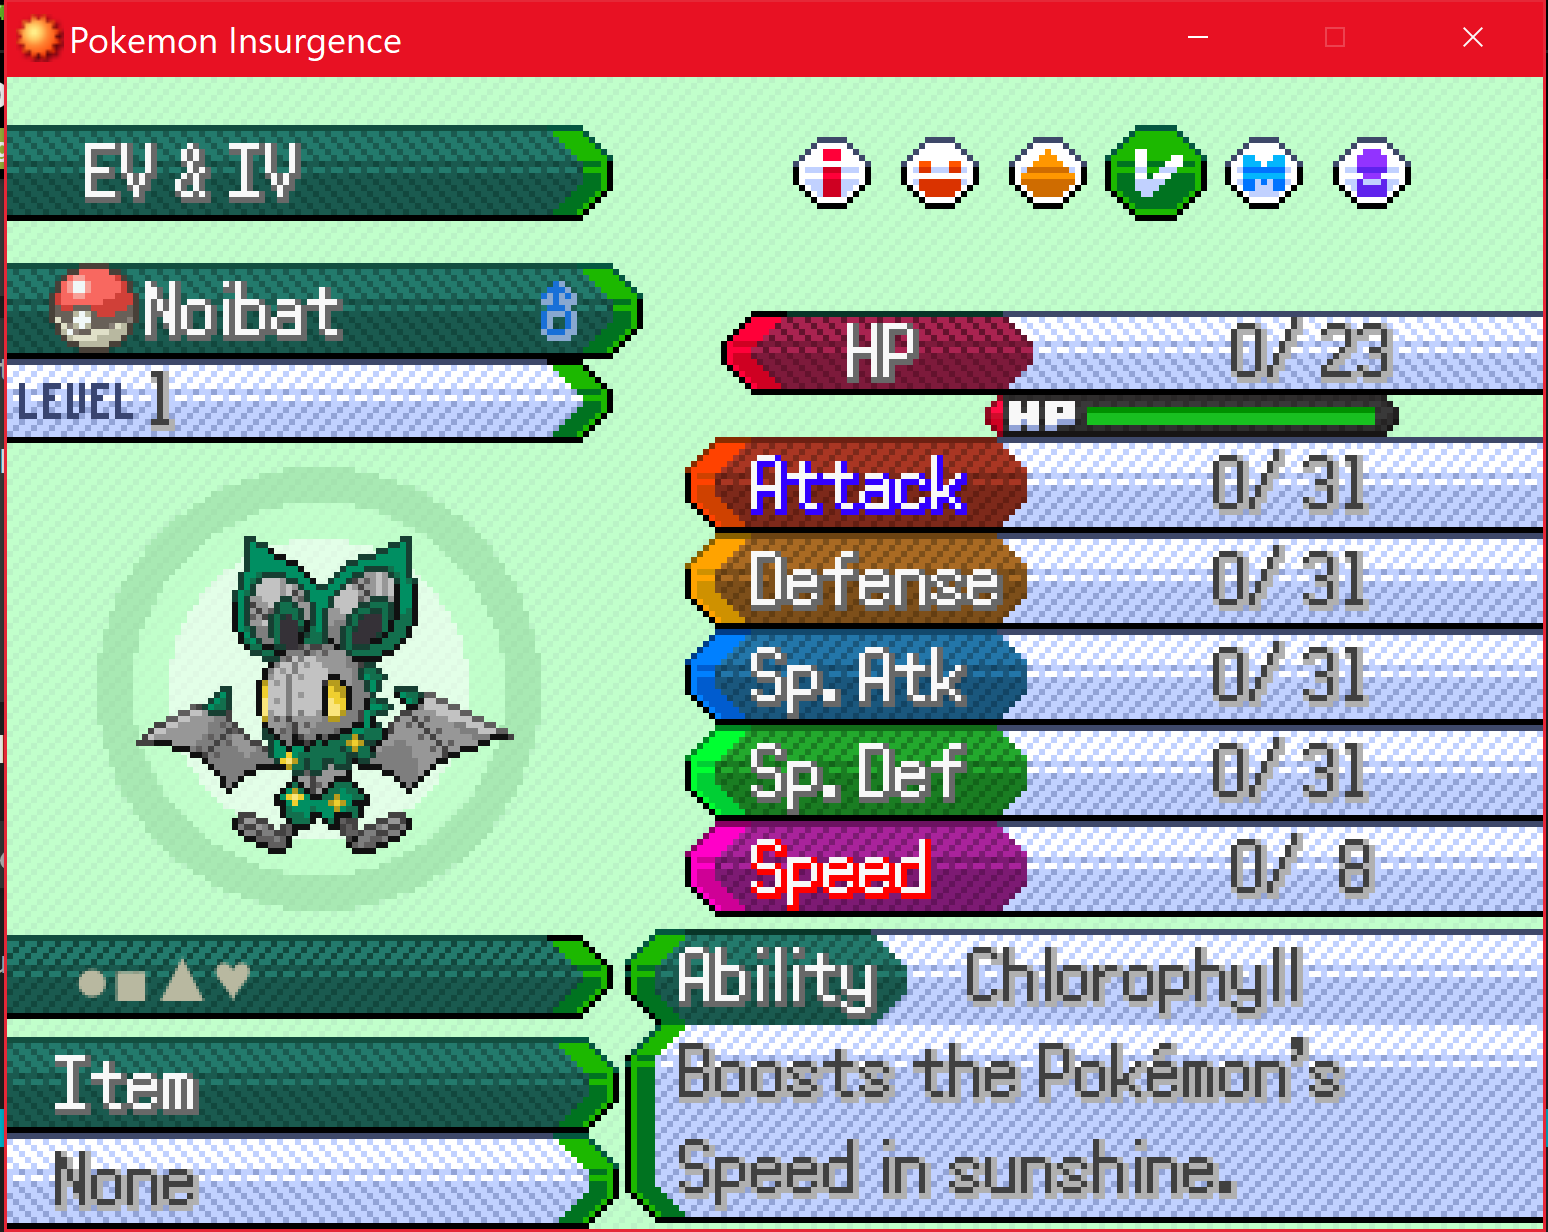 Afdeling faktureres Lil Looking for delta Noibat (completed) - Trading - The Pokemon Insurgence  Forums